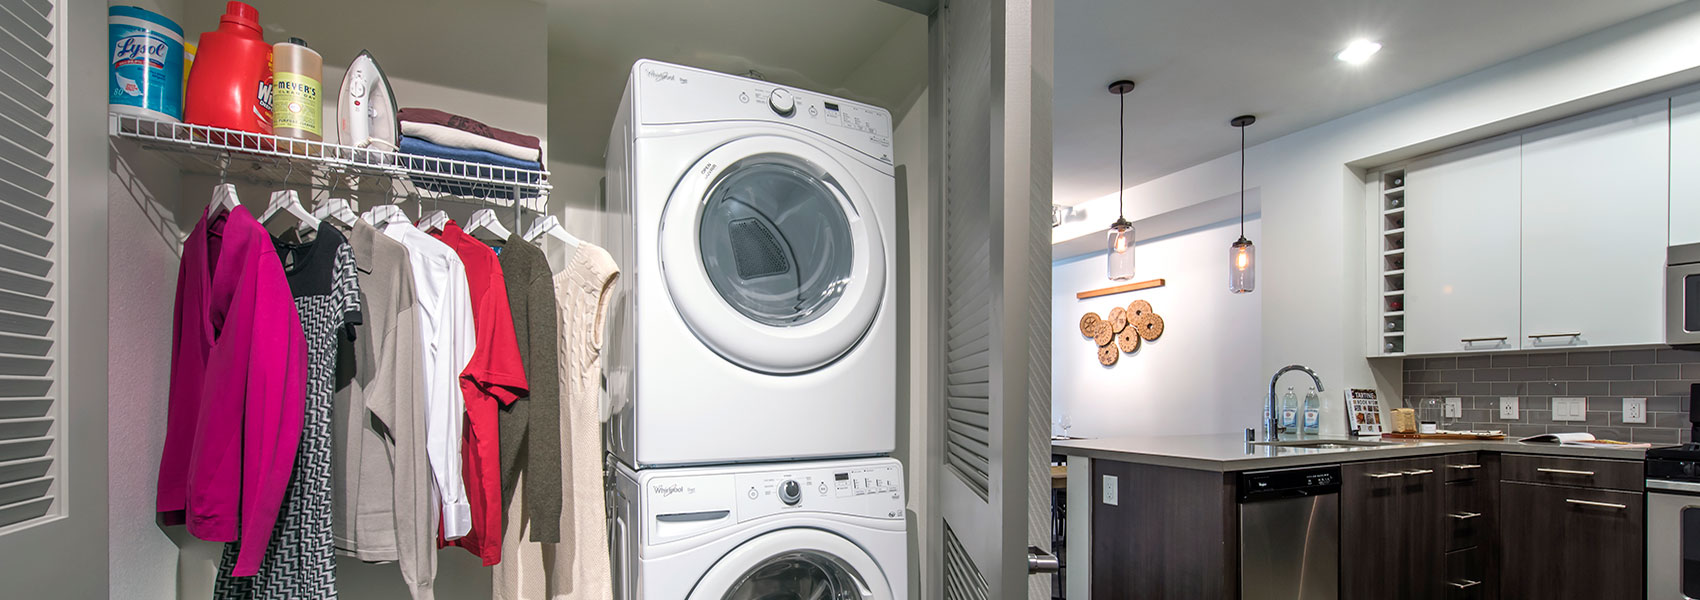 Organize your laundry room space, no matter how small or big!